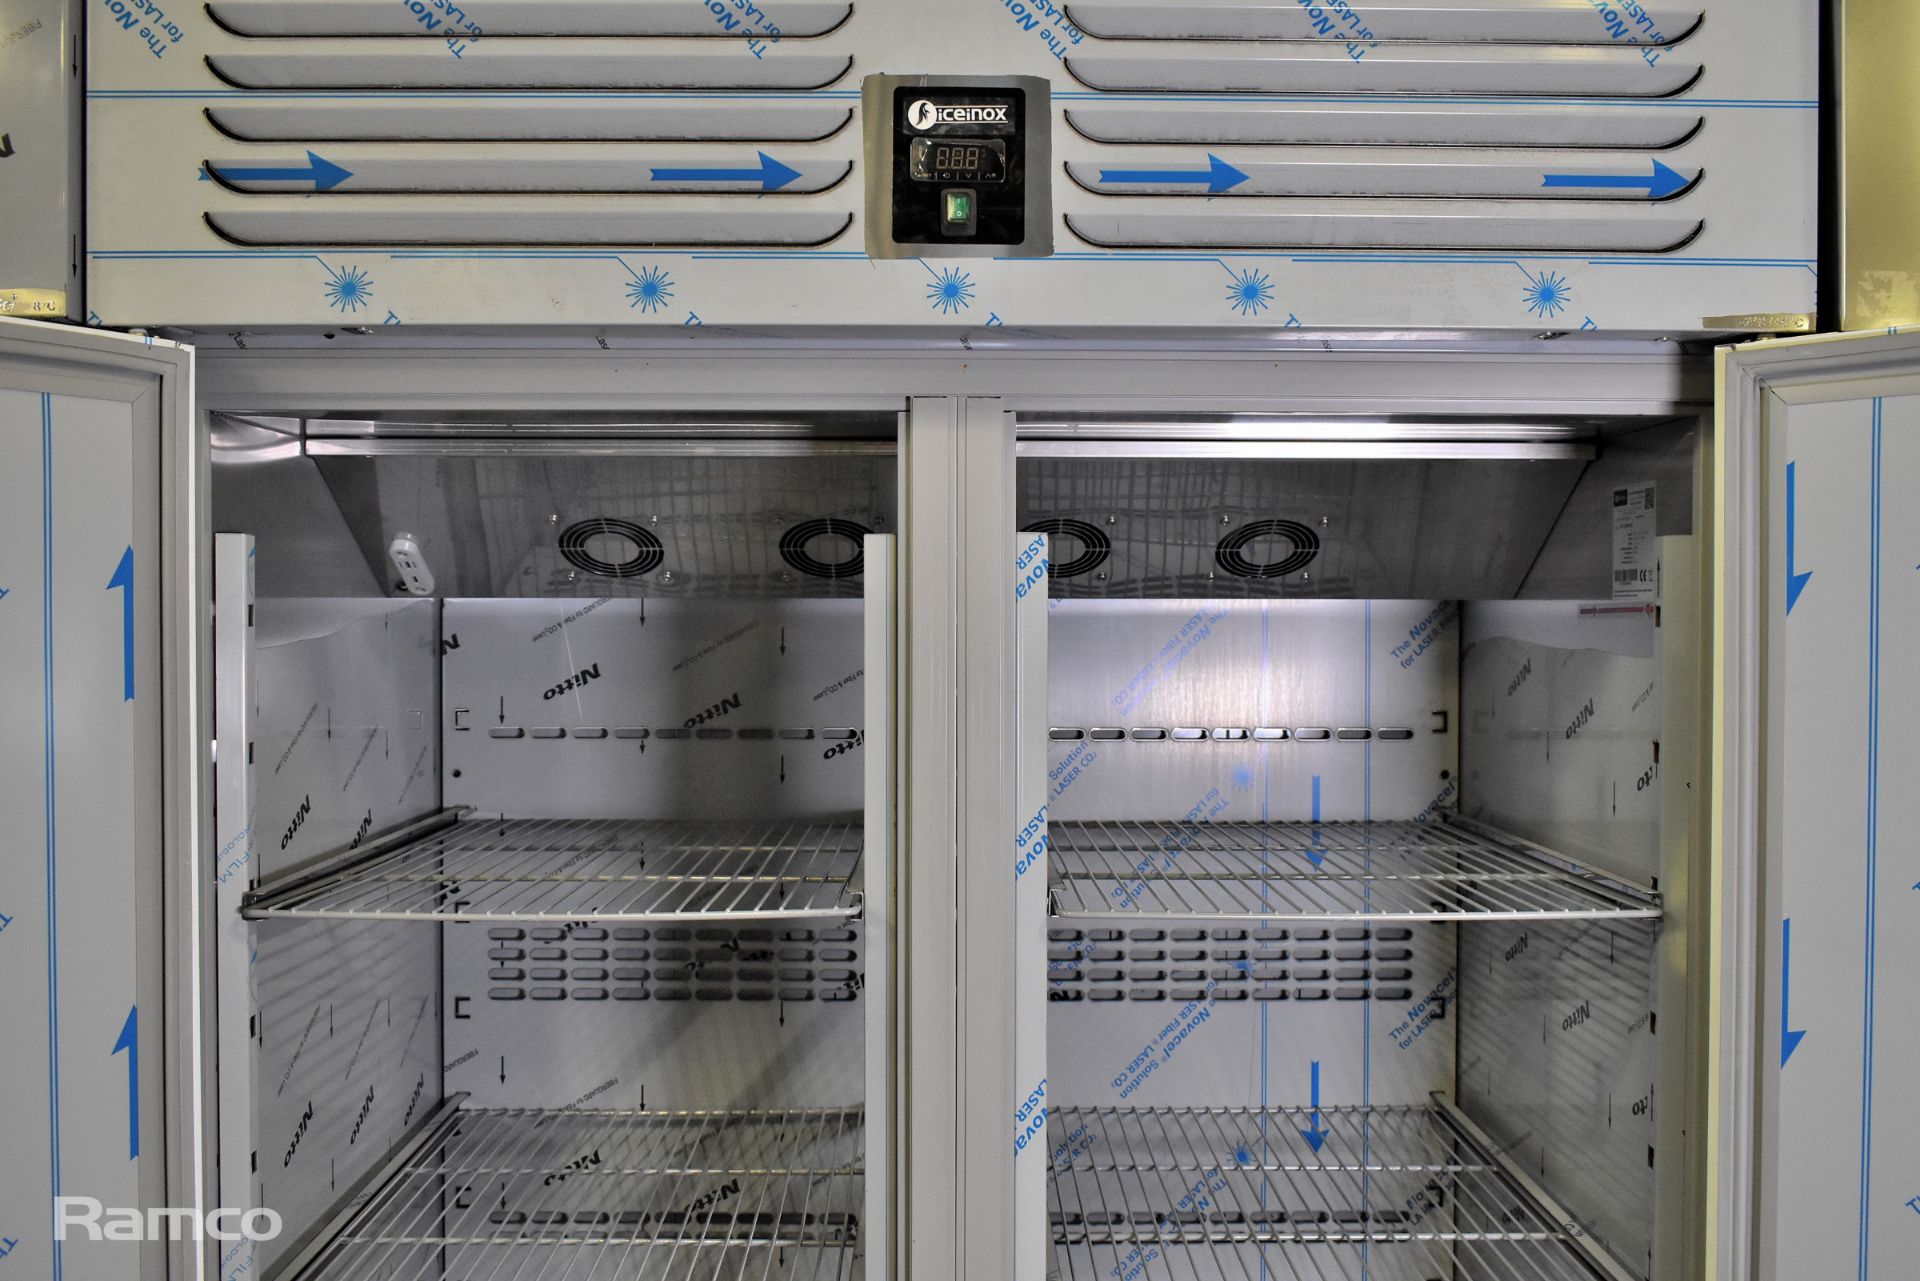 Iceinox VTS 1340 CR stainless steel, upright, double door refrigerator with 6 adjustable shelves - Image 3 of 6